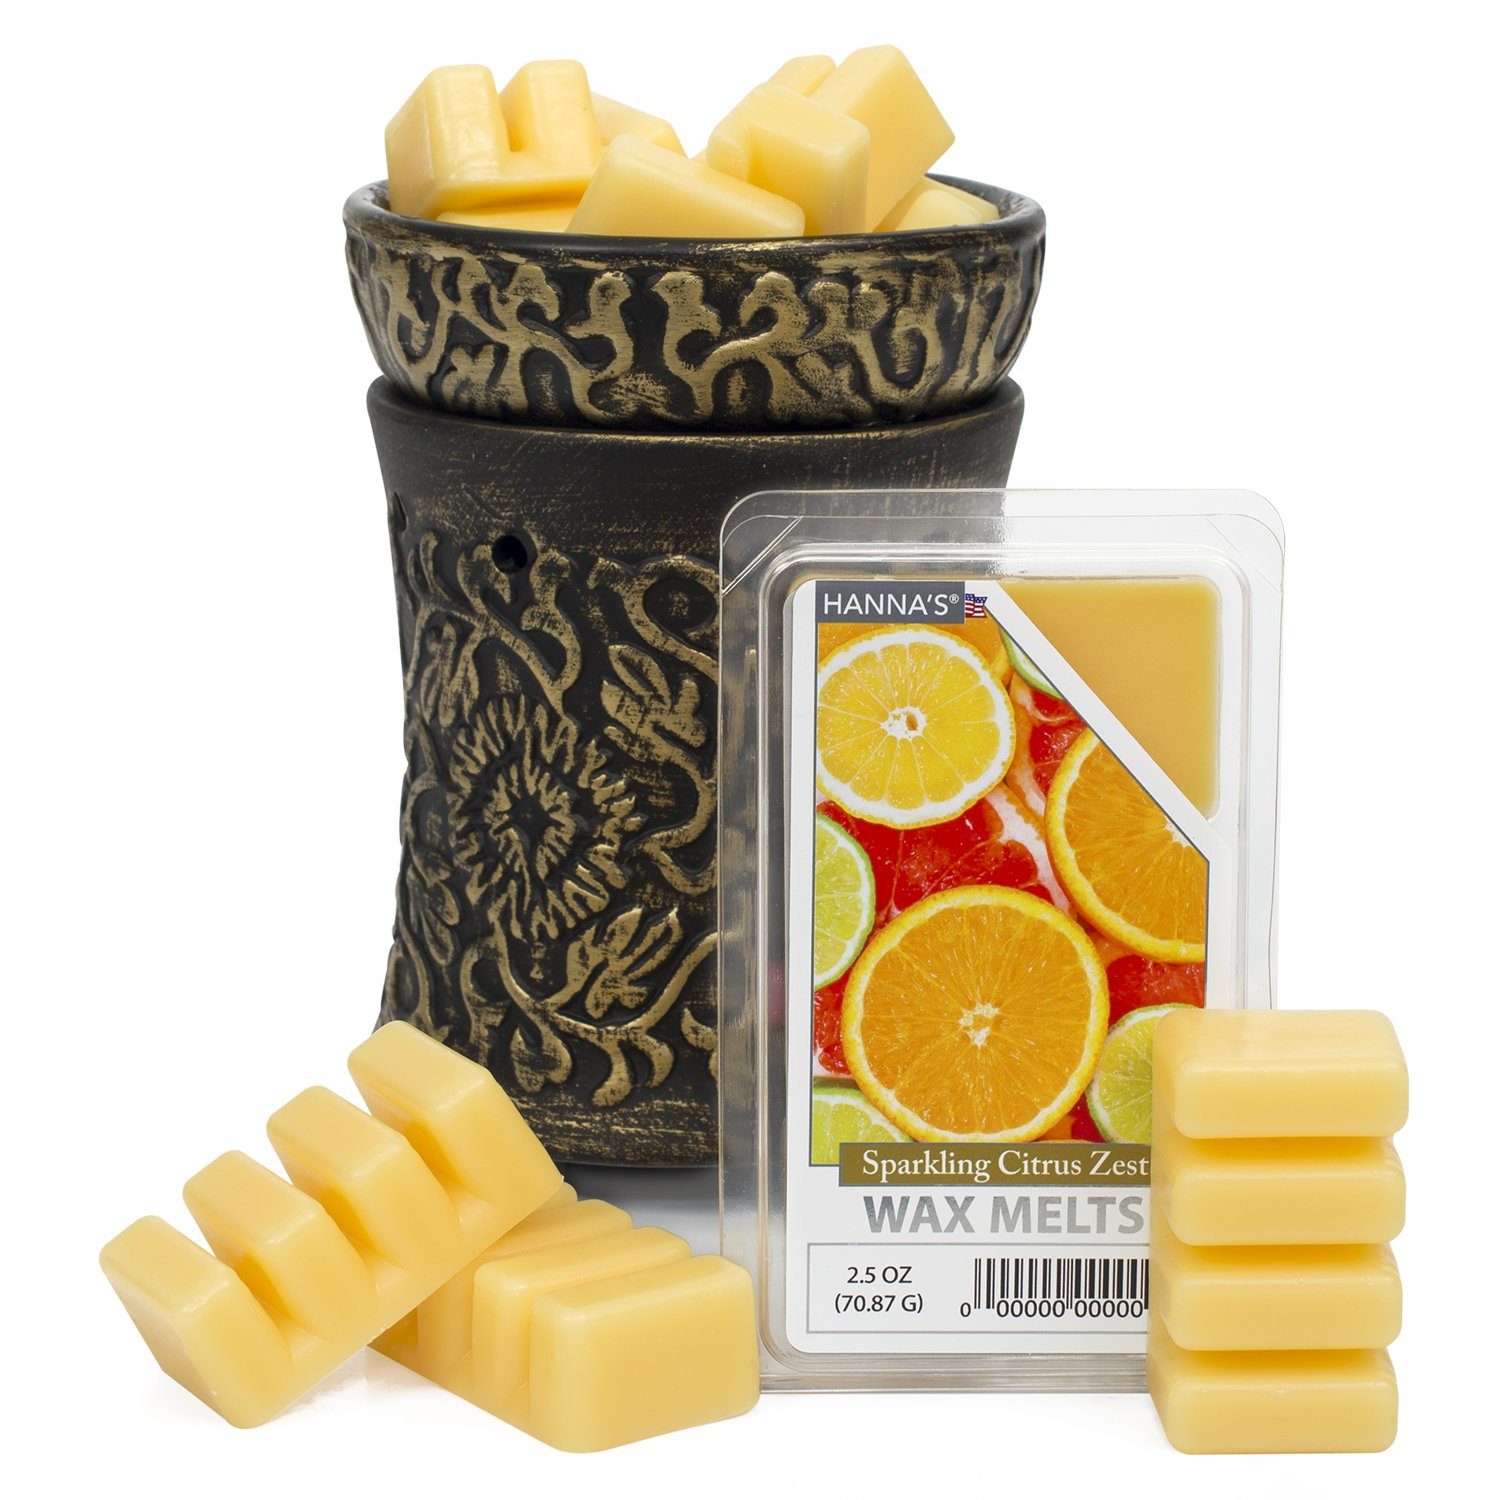 Buy Warm Apple Pie Wax Melts 6 Pack at Candlemart.com for ...